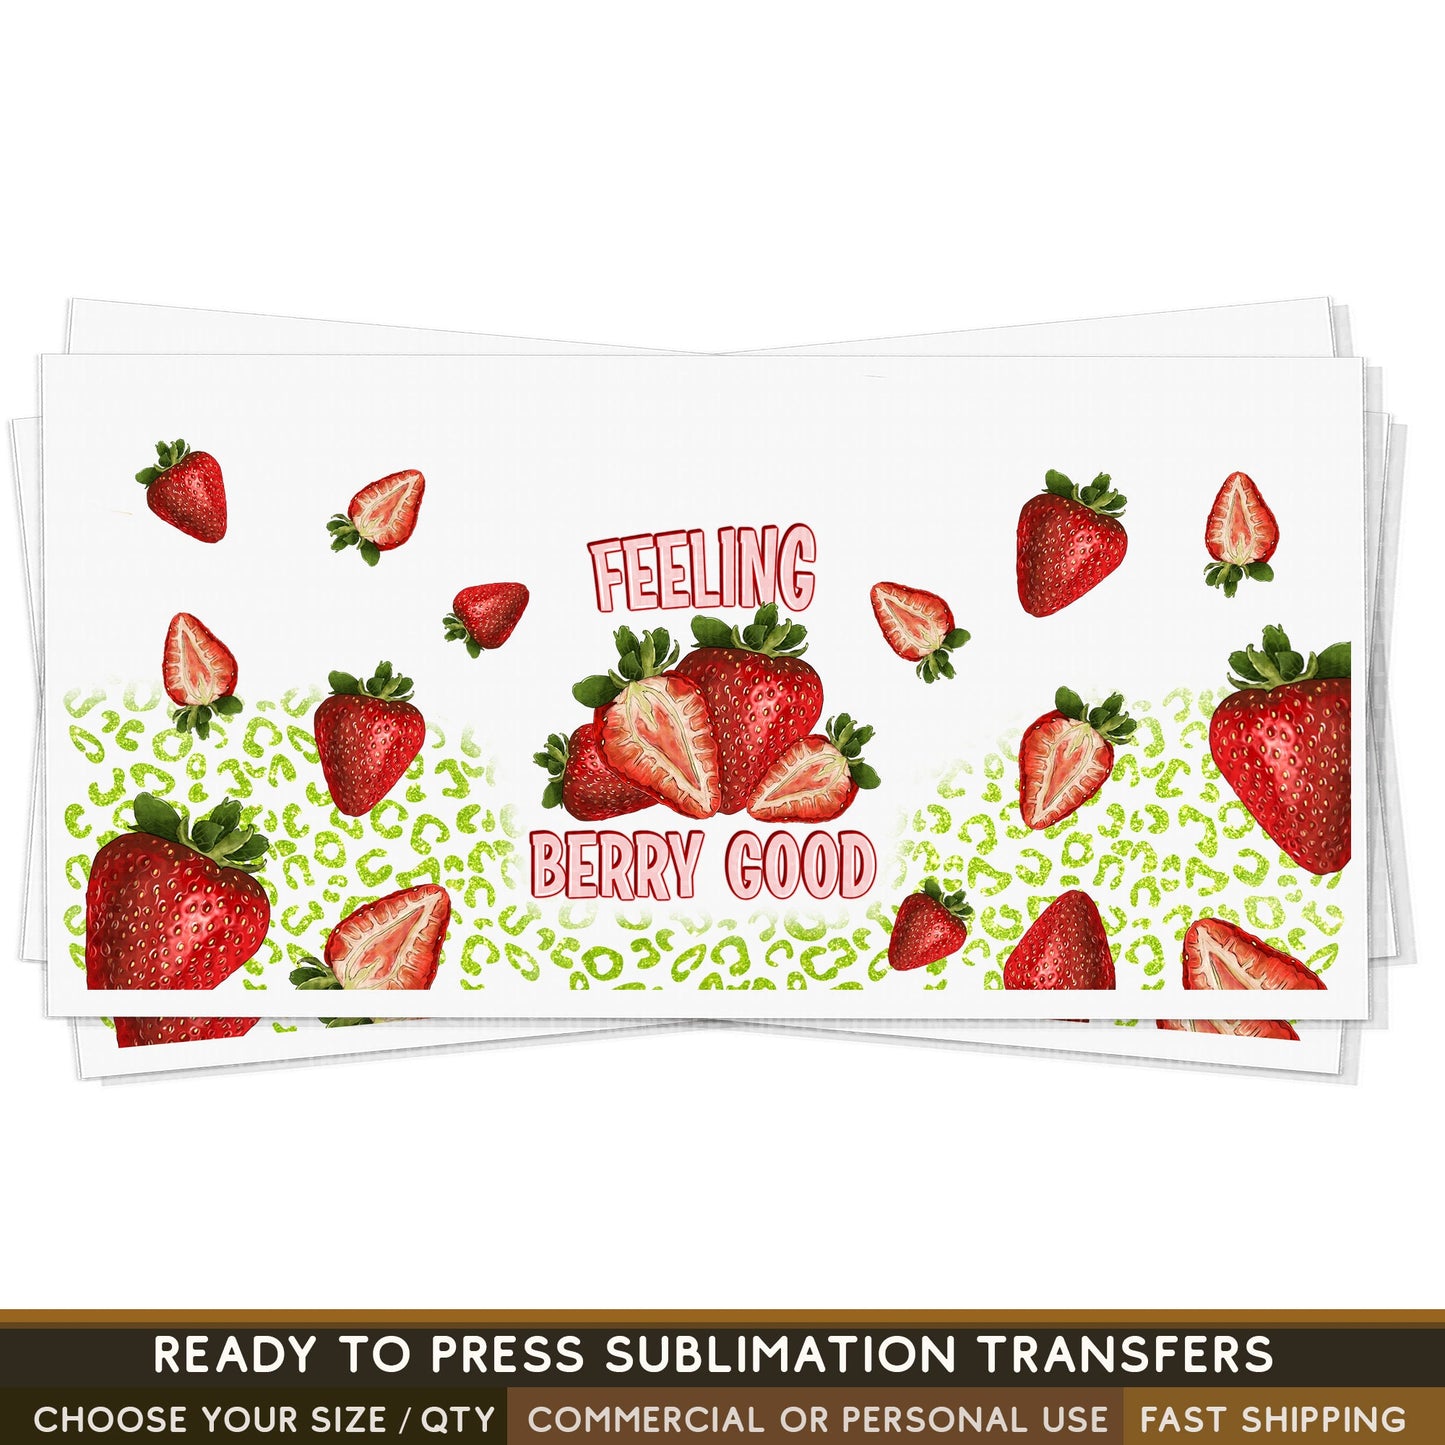 Feeling Berry Good Sublimation Glass Wrap | Sublimation 16oz Glass Wrap, Sublimation Glass Cup Transfer, Ready to Press Sublimation